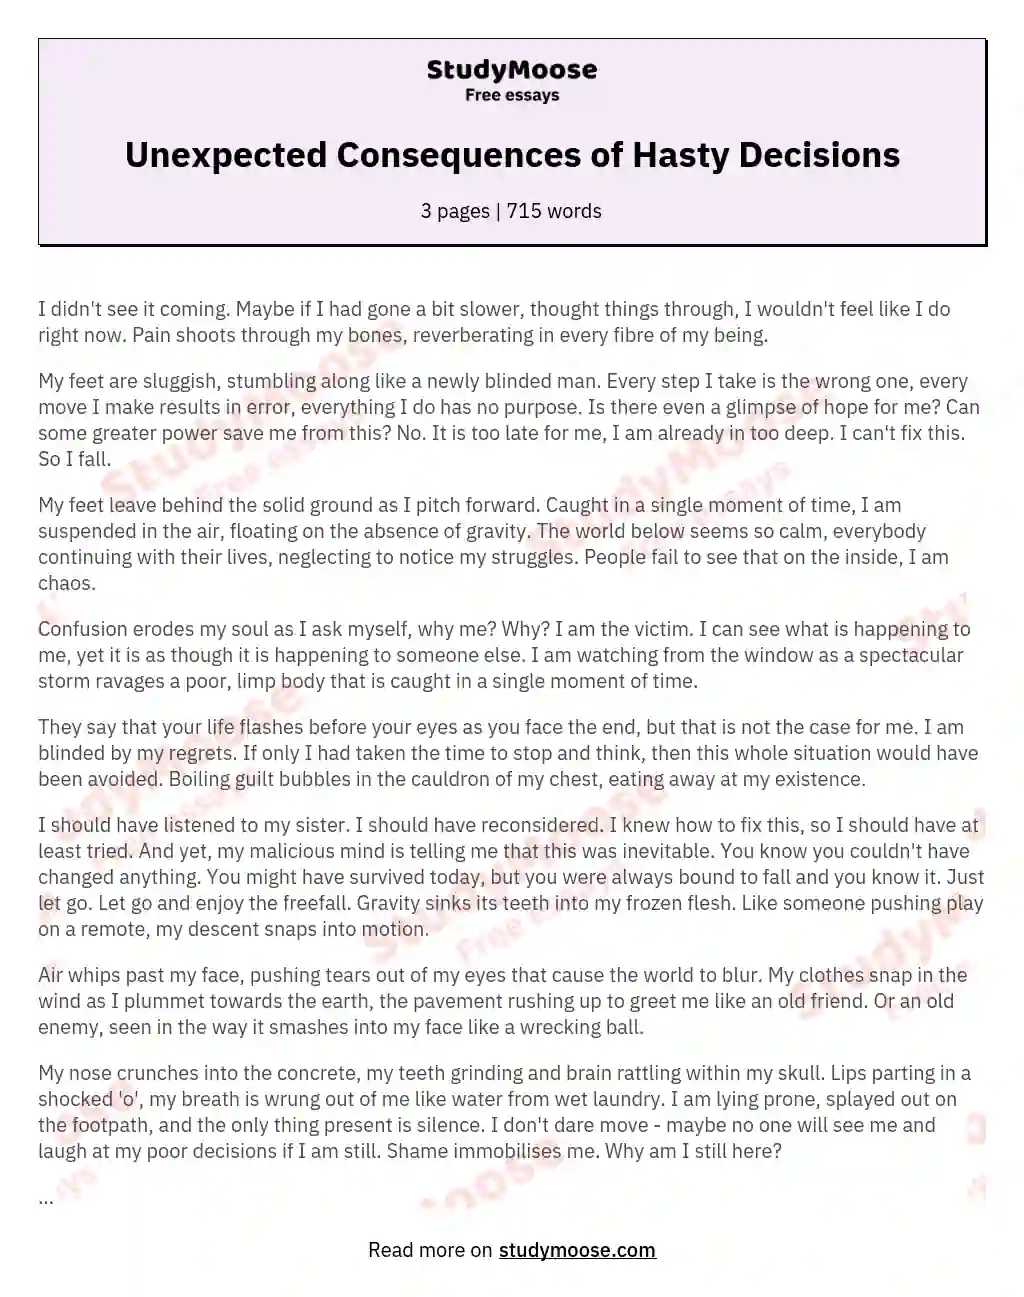 Unexpected Consequences of Hasty Decisions essay